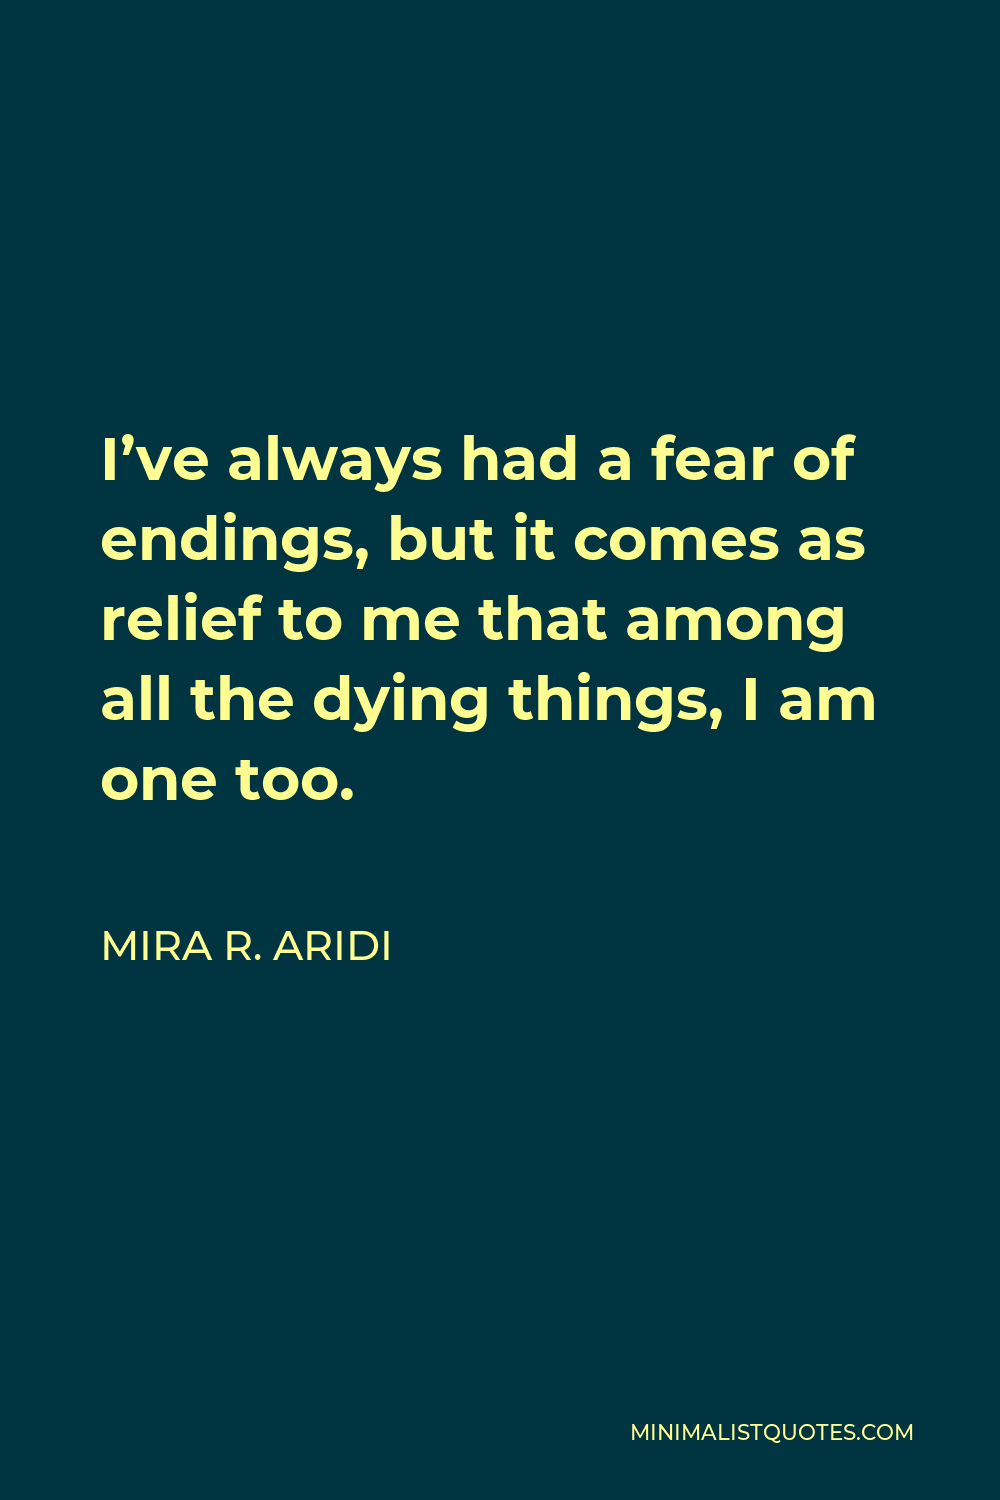 Mira R. Aridi Quote - I’ve always had a fear of endings, but it comes as relief to me that among all the dying things, I am one too.